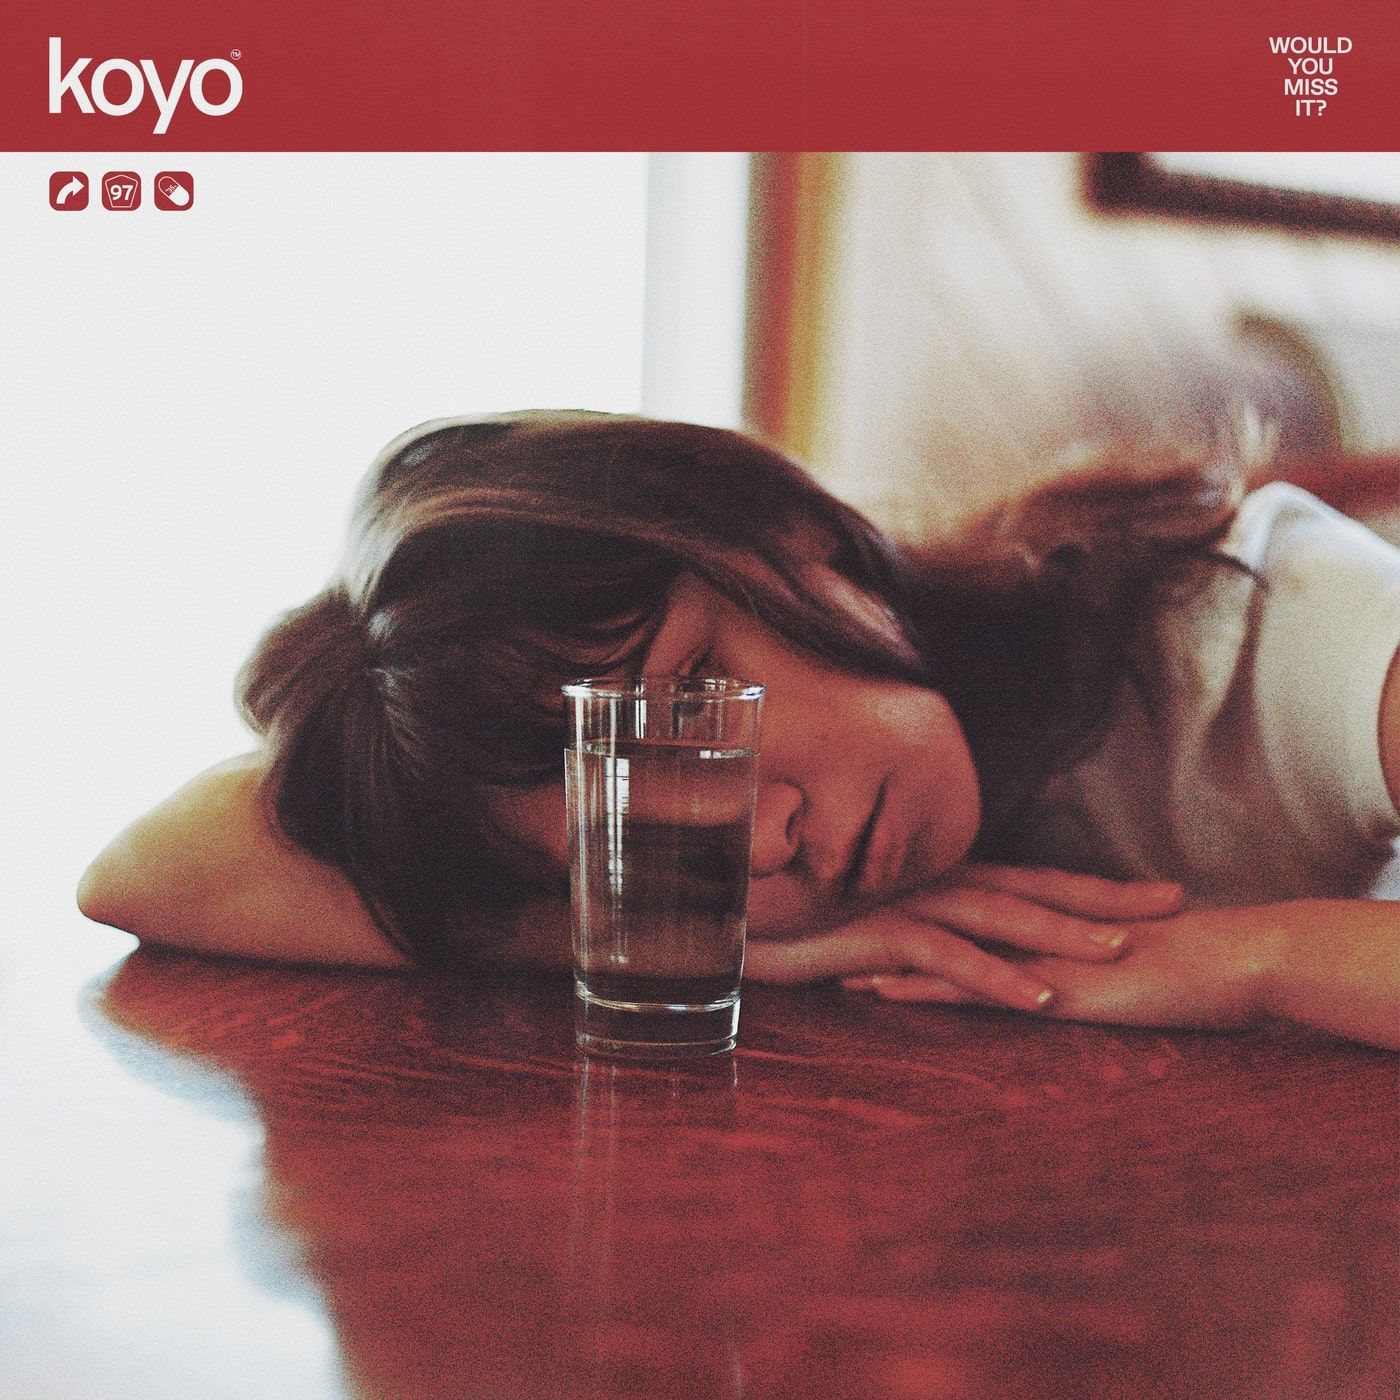 KOYO - WOULD YOU MISS IT FRONT COVER